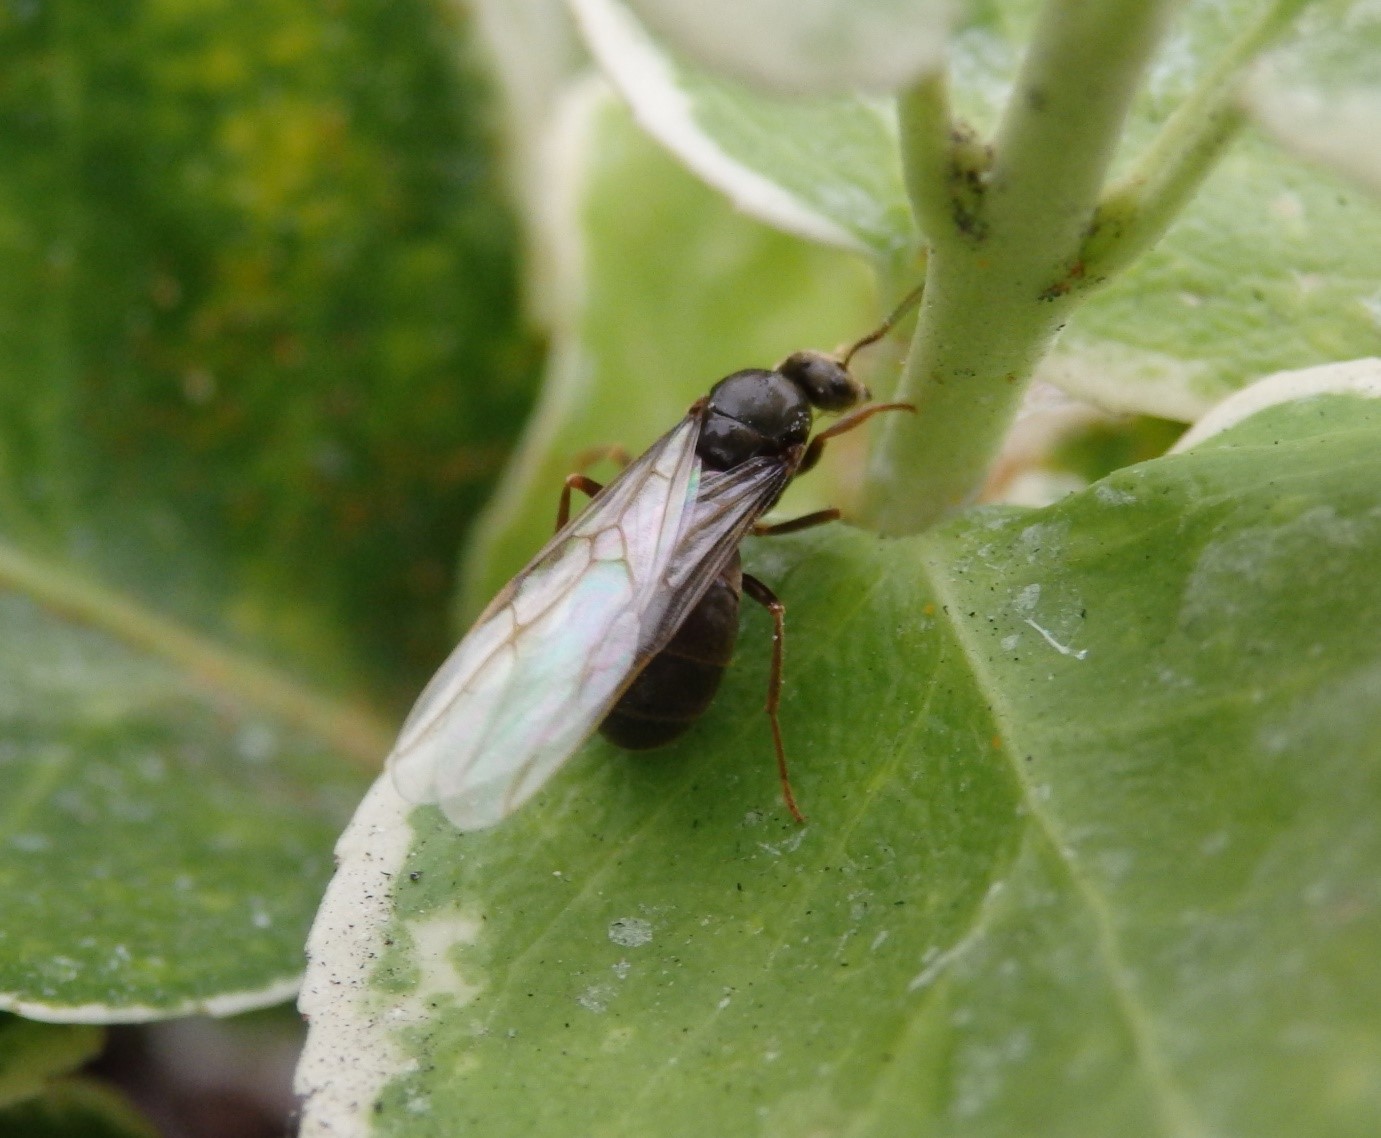 A winged queen black garden ant (Lasius niger), resting on a green leaf